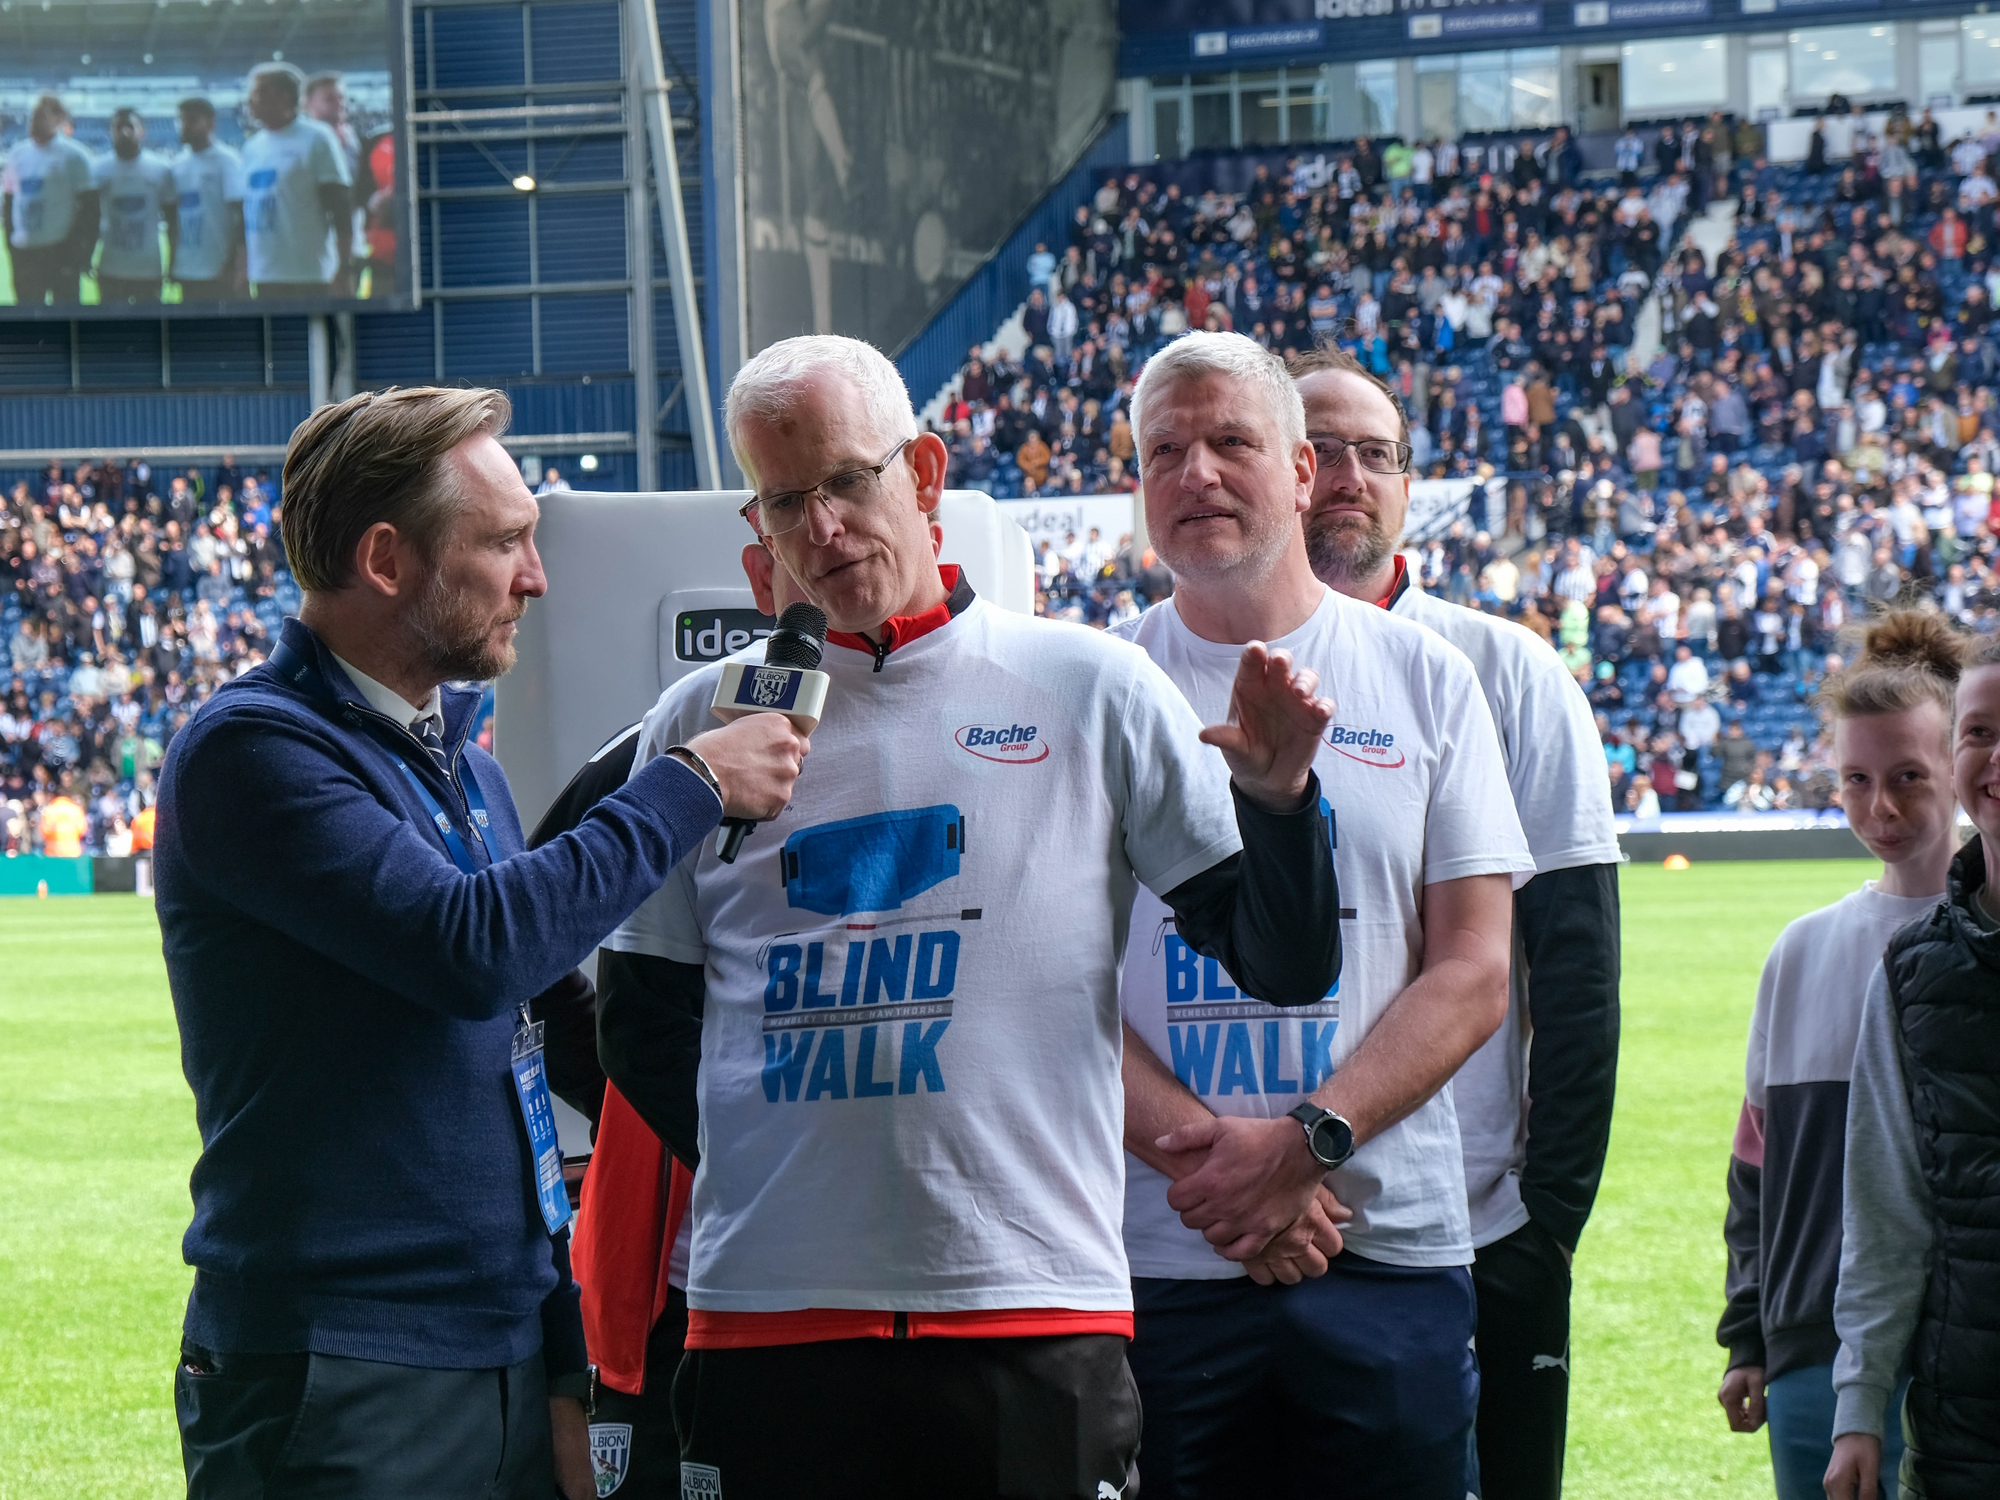 Blind Walk finishes at The Hawthorns